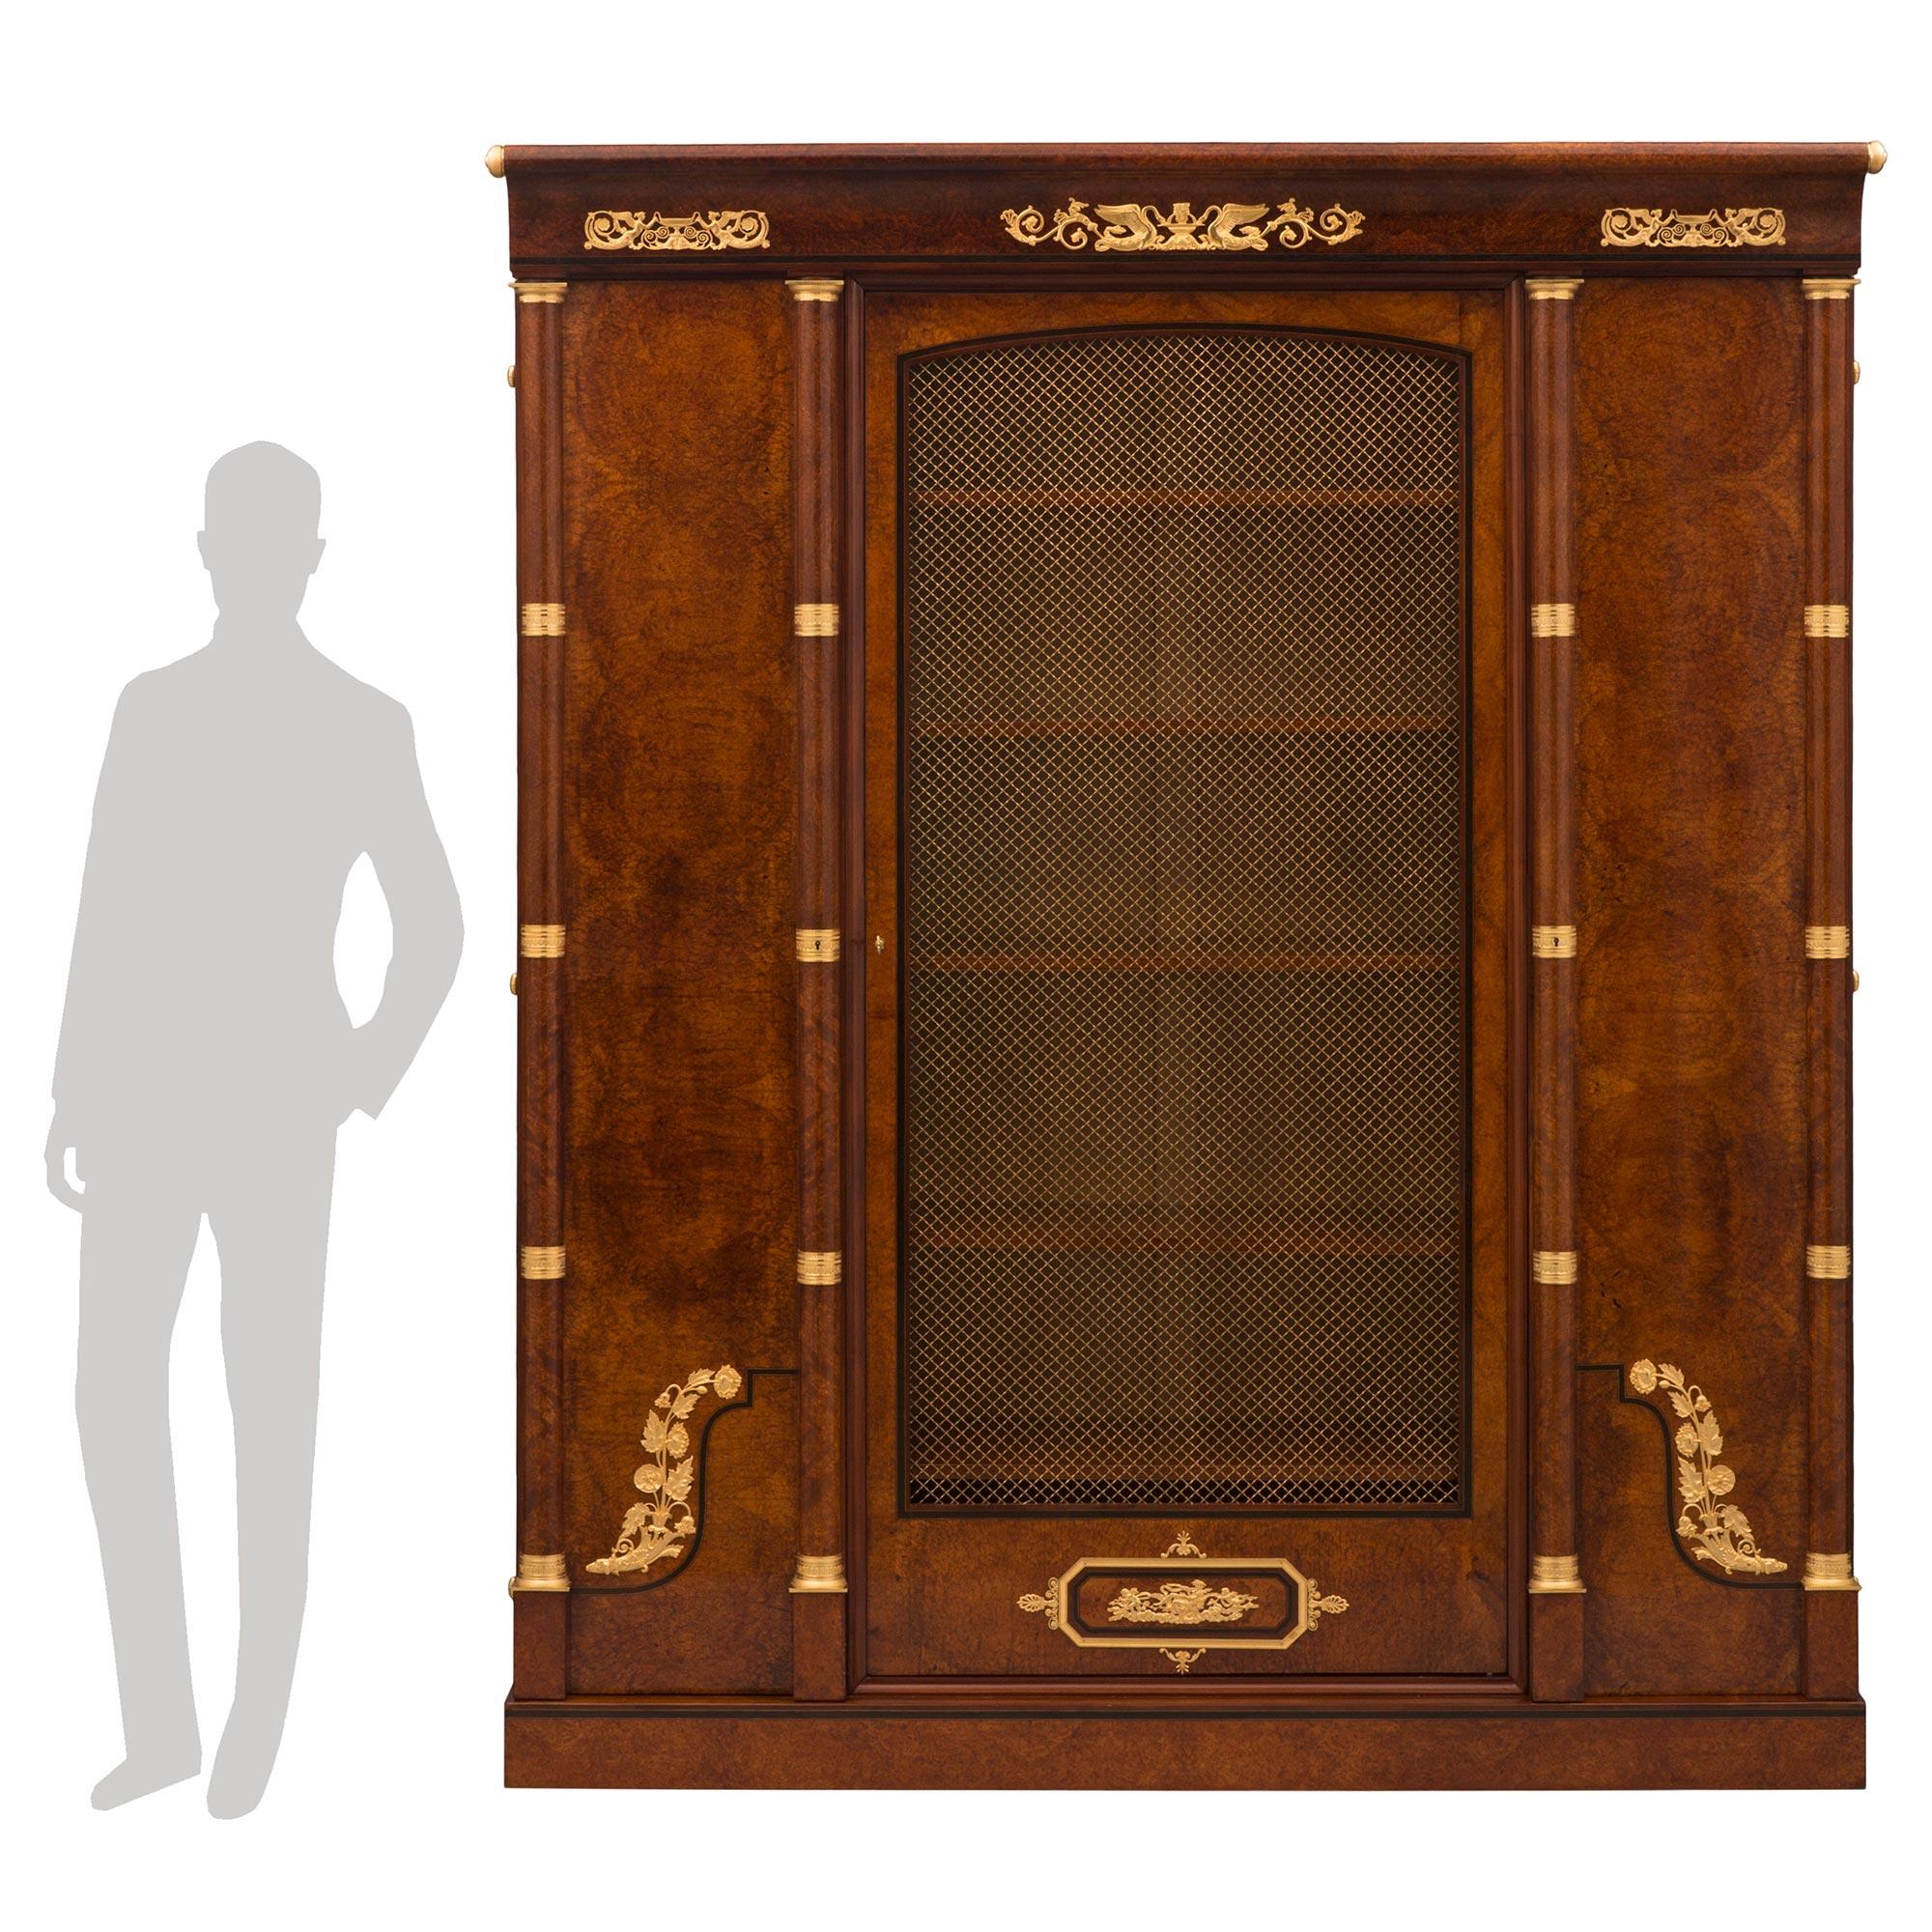 An impressive and high quality French 19th century Empire st. burl elm, ebony, tulipwood, and ormolu cabinet. The large scale three door cabinet is raised by a straight base with an elegant ebony band and two fine tulipwood fillets. The central door